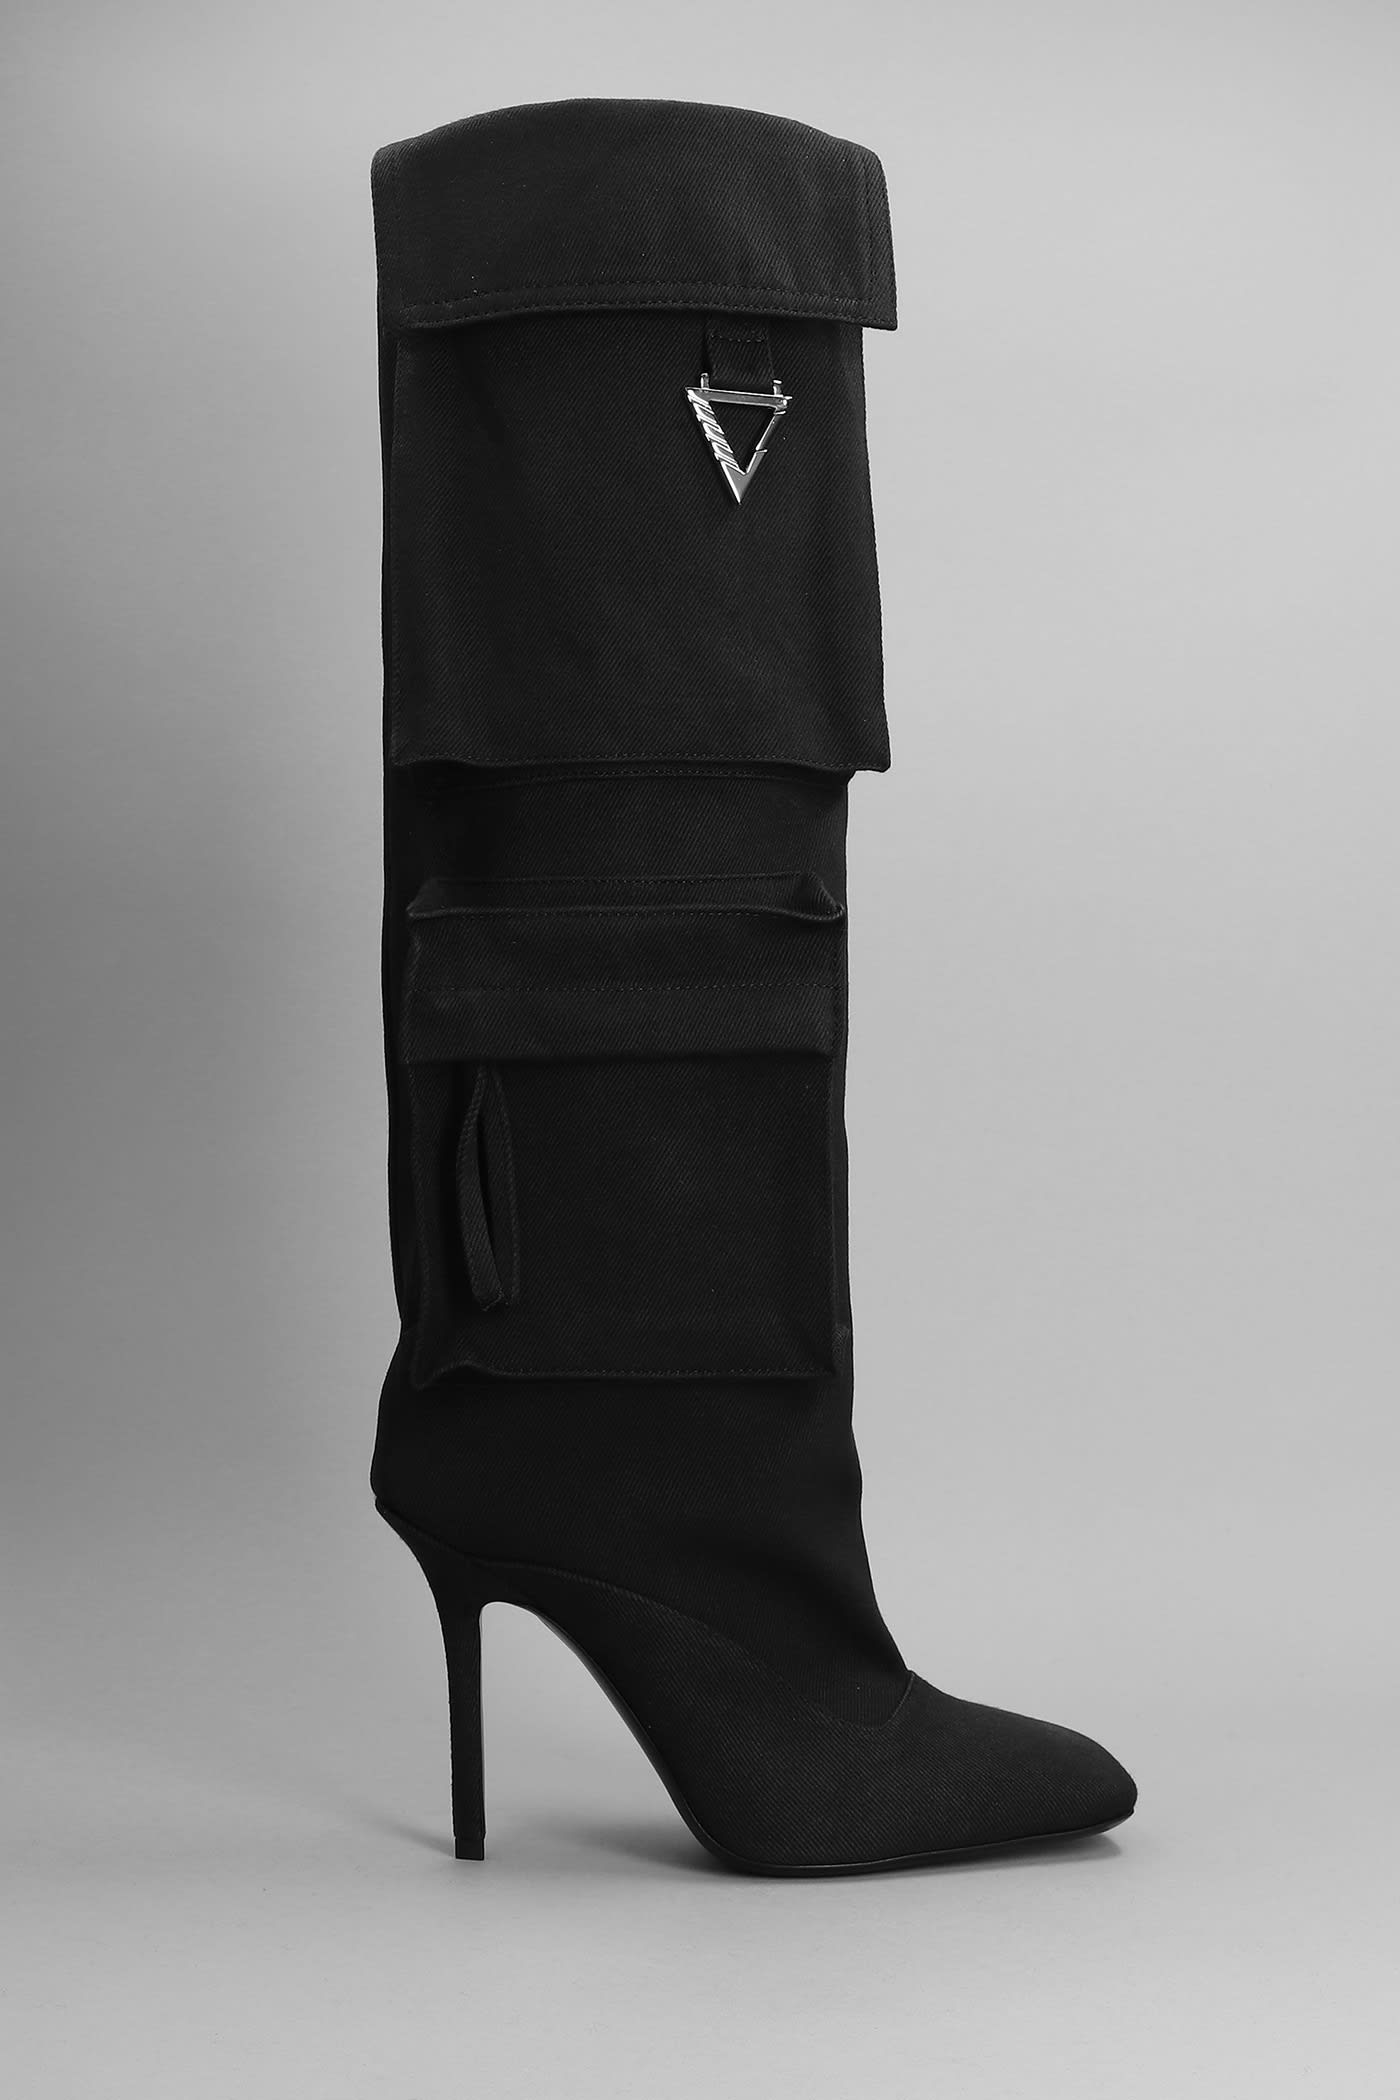 Sienna Tube High Heels Boots In Black Canvas